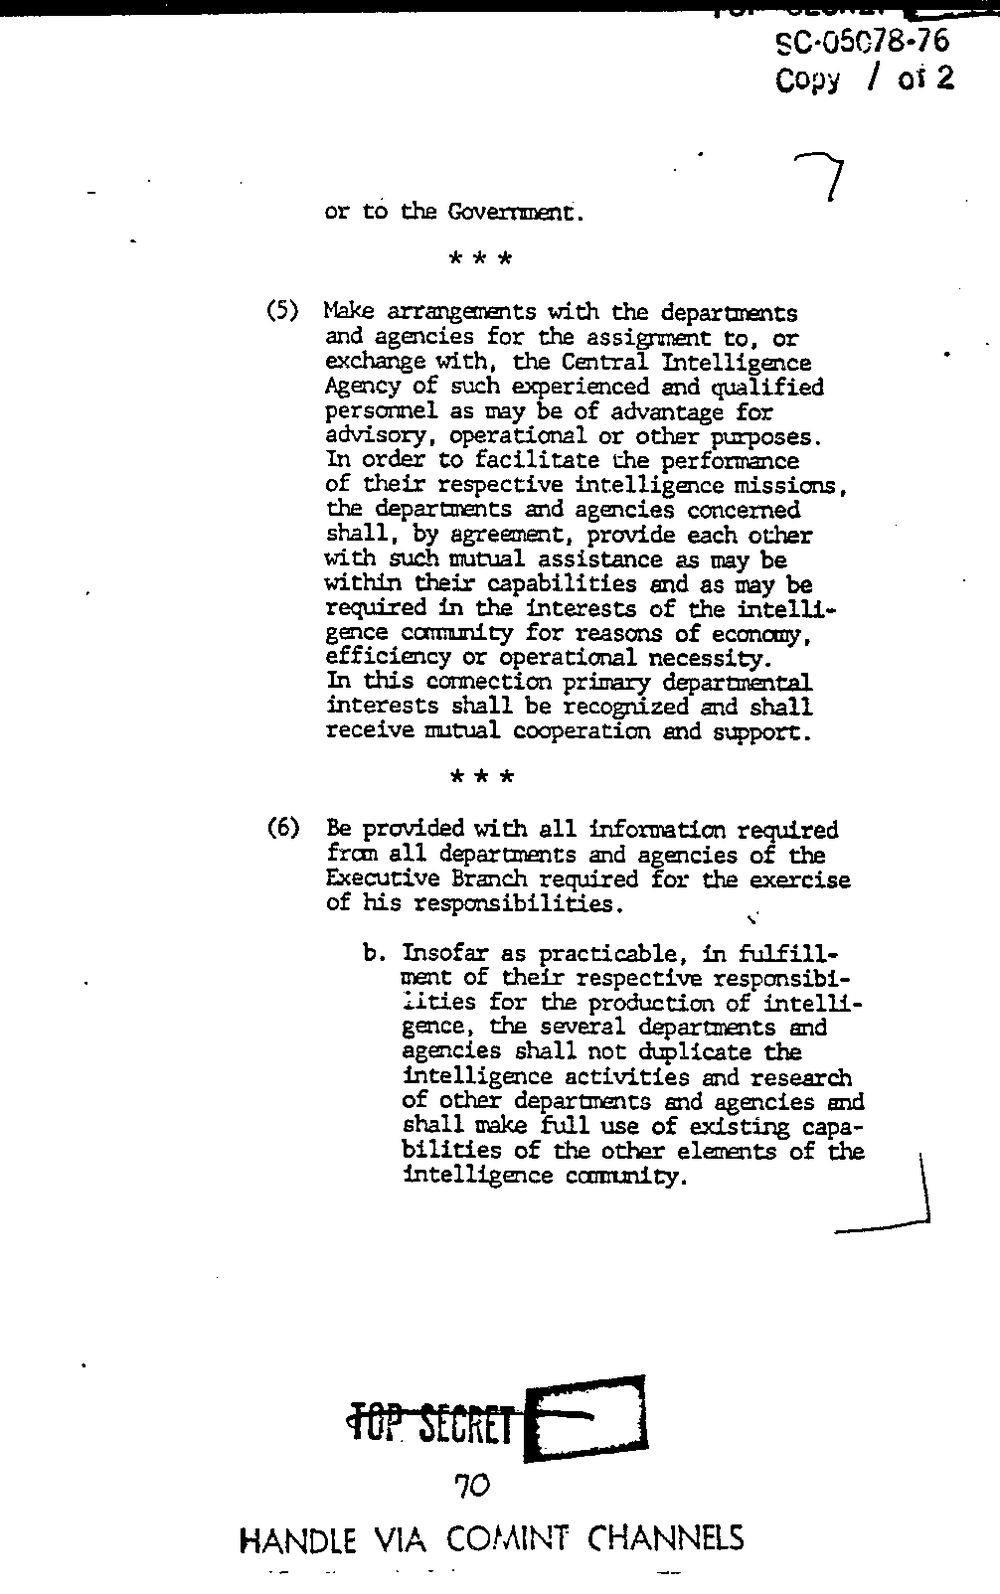 Page 78 from Report on Inquiry Into CIA Related Electronic Surveillance Activities